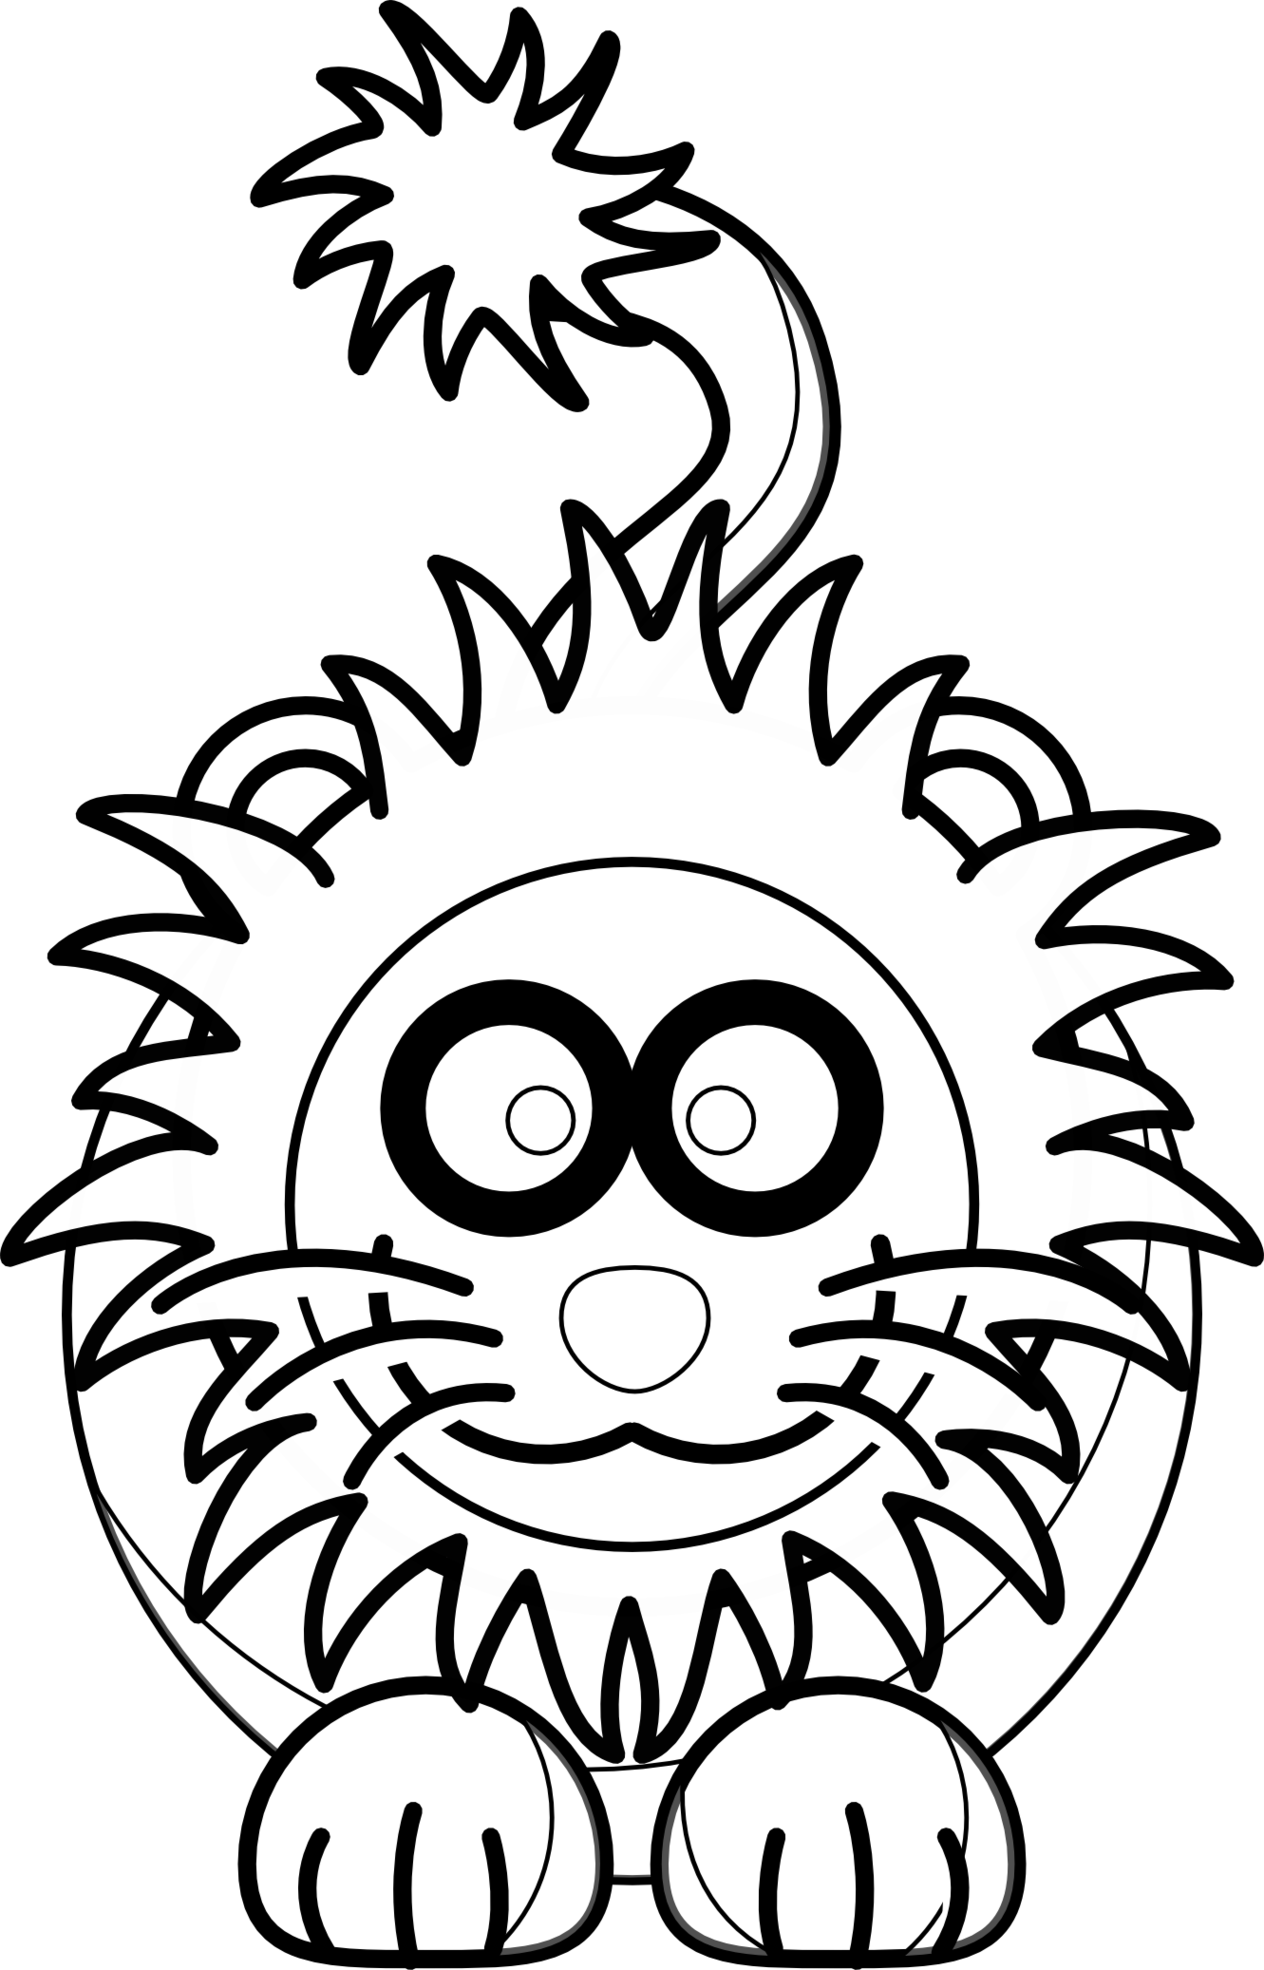 free black and white lion clipart - photo #15